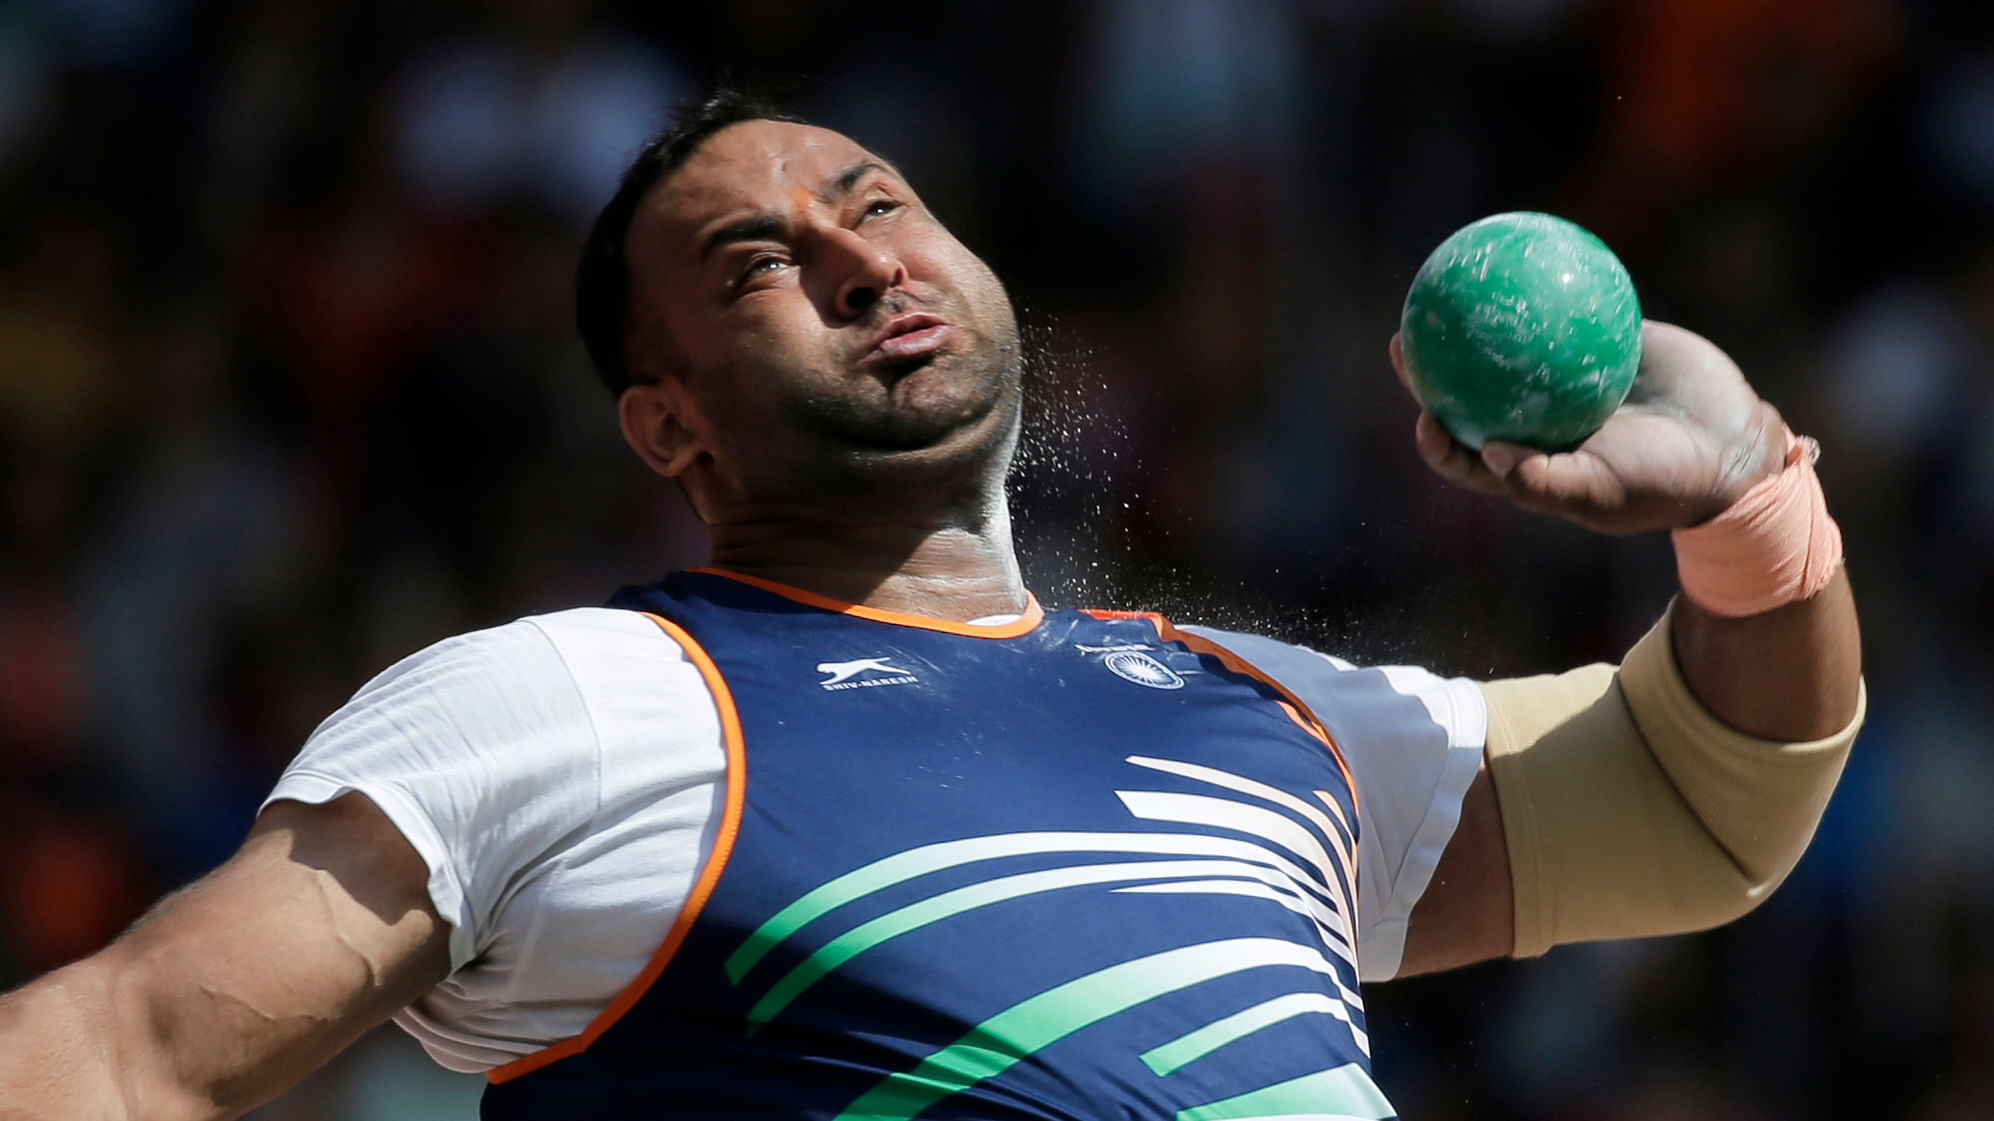 Asian champion Inderjeet Singh&nbsp;qualified for the final with the eighth best throw among the 12 finalists. (Photo: AP)